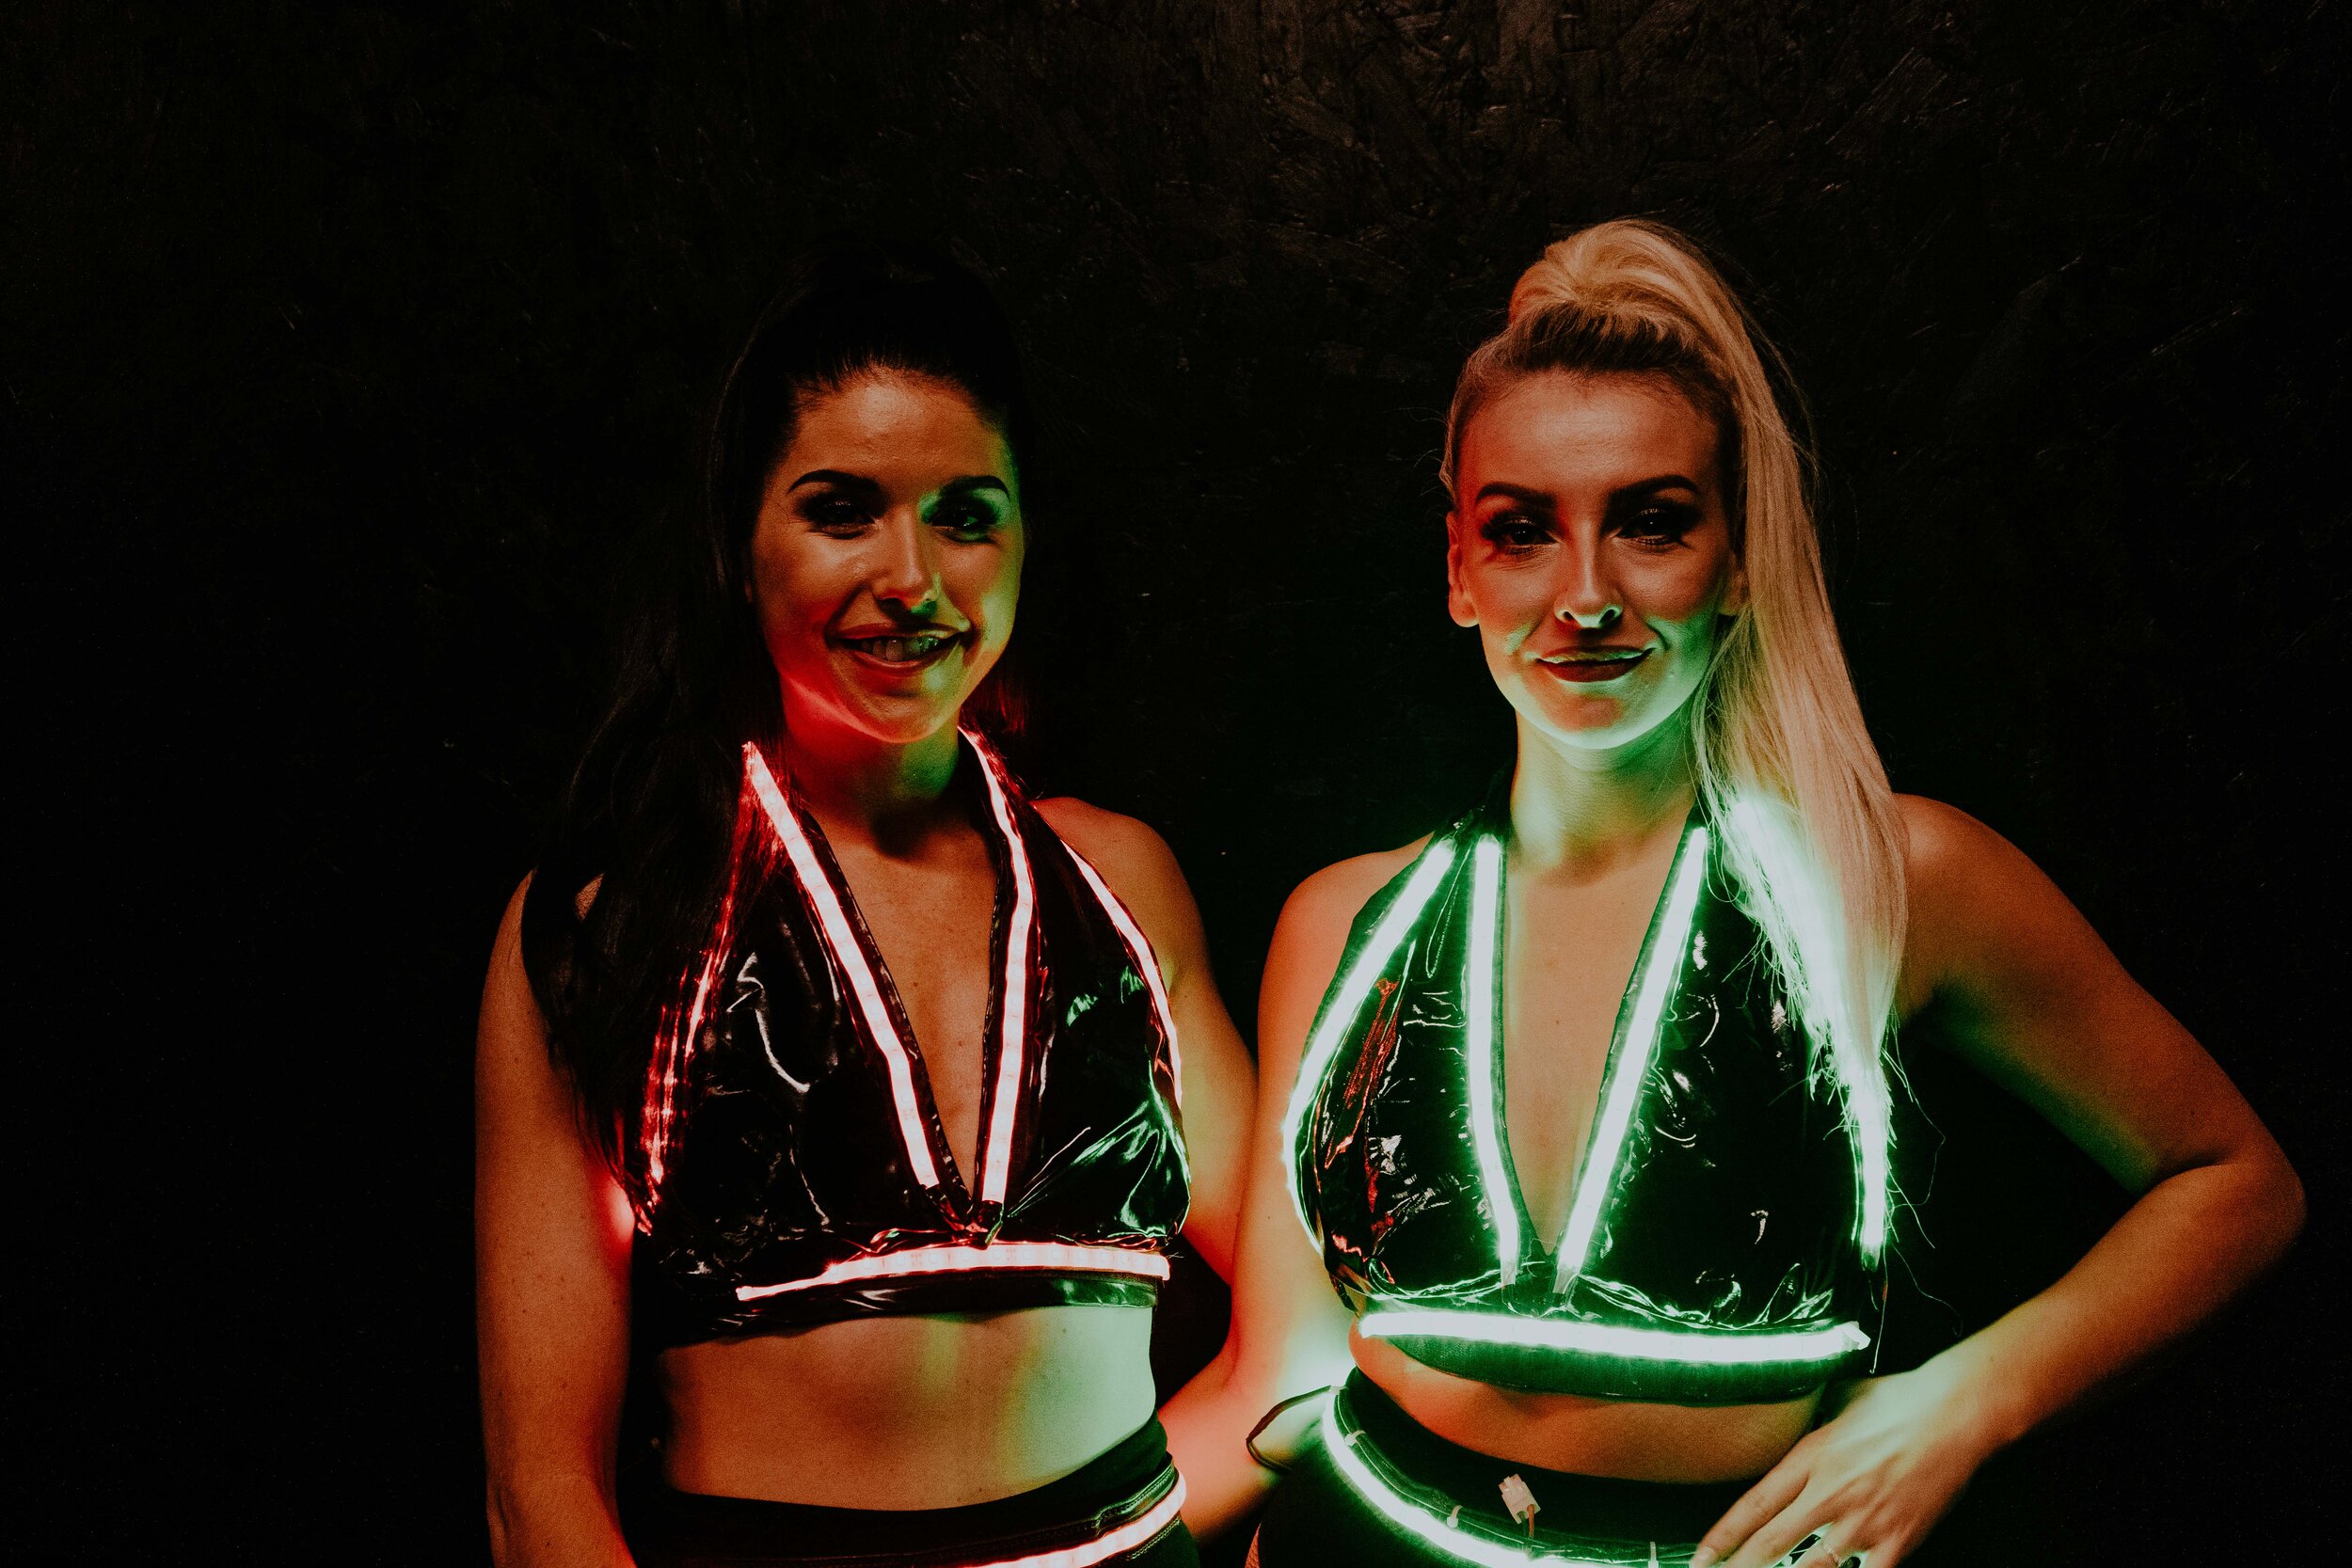 LEDS glo glo girls performing at events